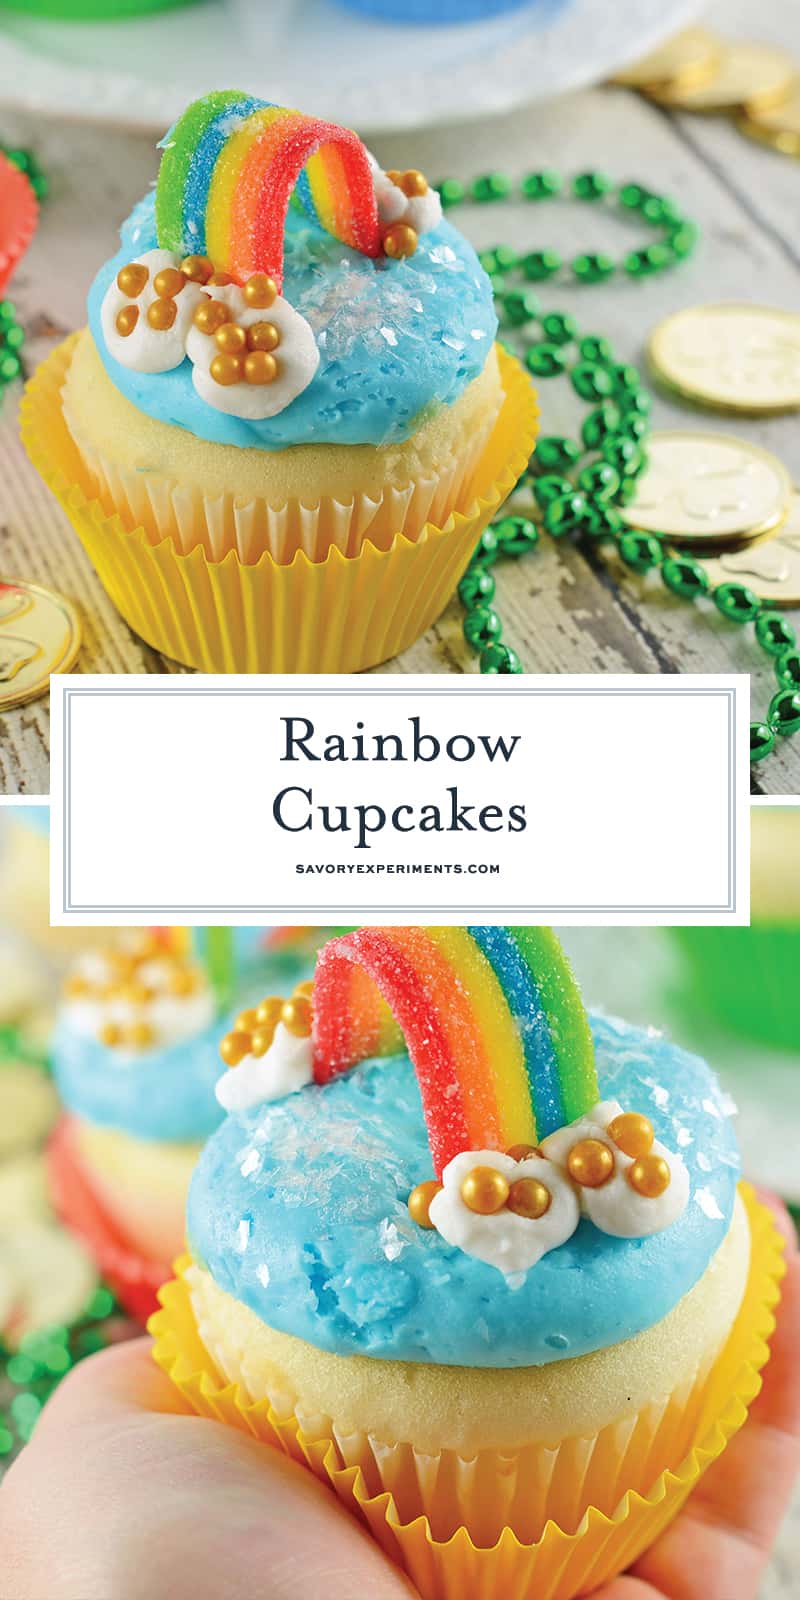 Rainbow Cupcakes are super easy and cute. The perfect cupcake for St. Patrick's Day, children's birthday parties or any random day of the week! #rainbowcupcakes #stapatricksdaydesserts www.savoryexperiments.com 